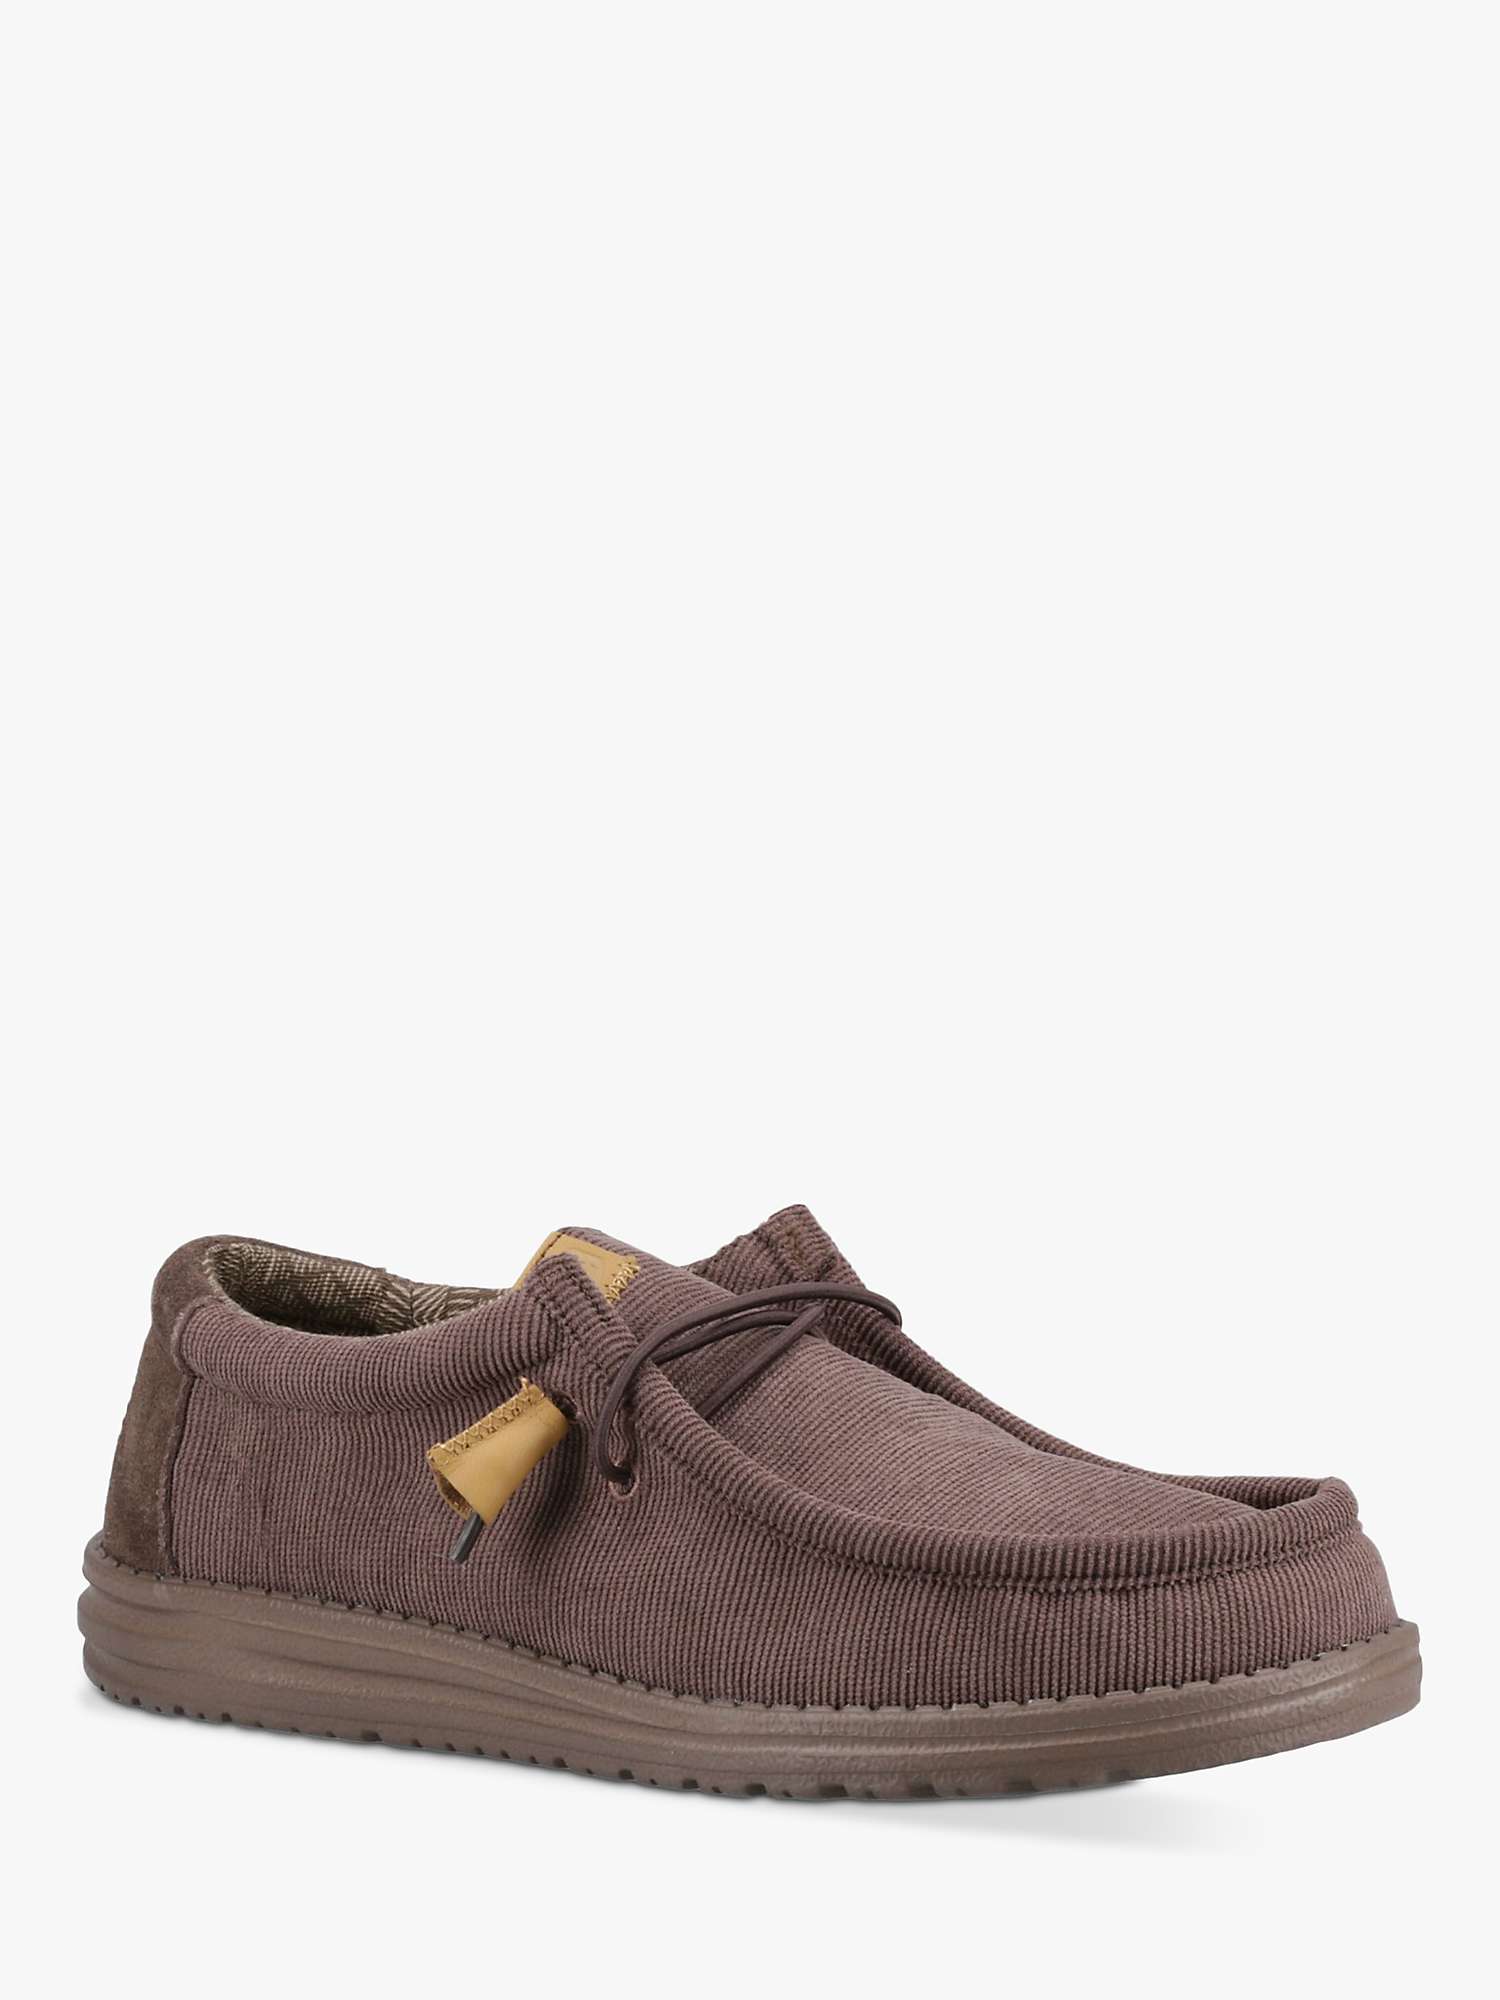 Hey Dude Wally Corduroy Moccasins, Chocolate at John Lewis & Partners